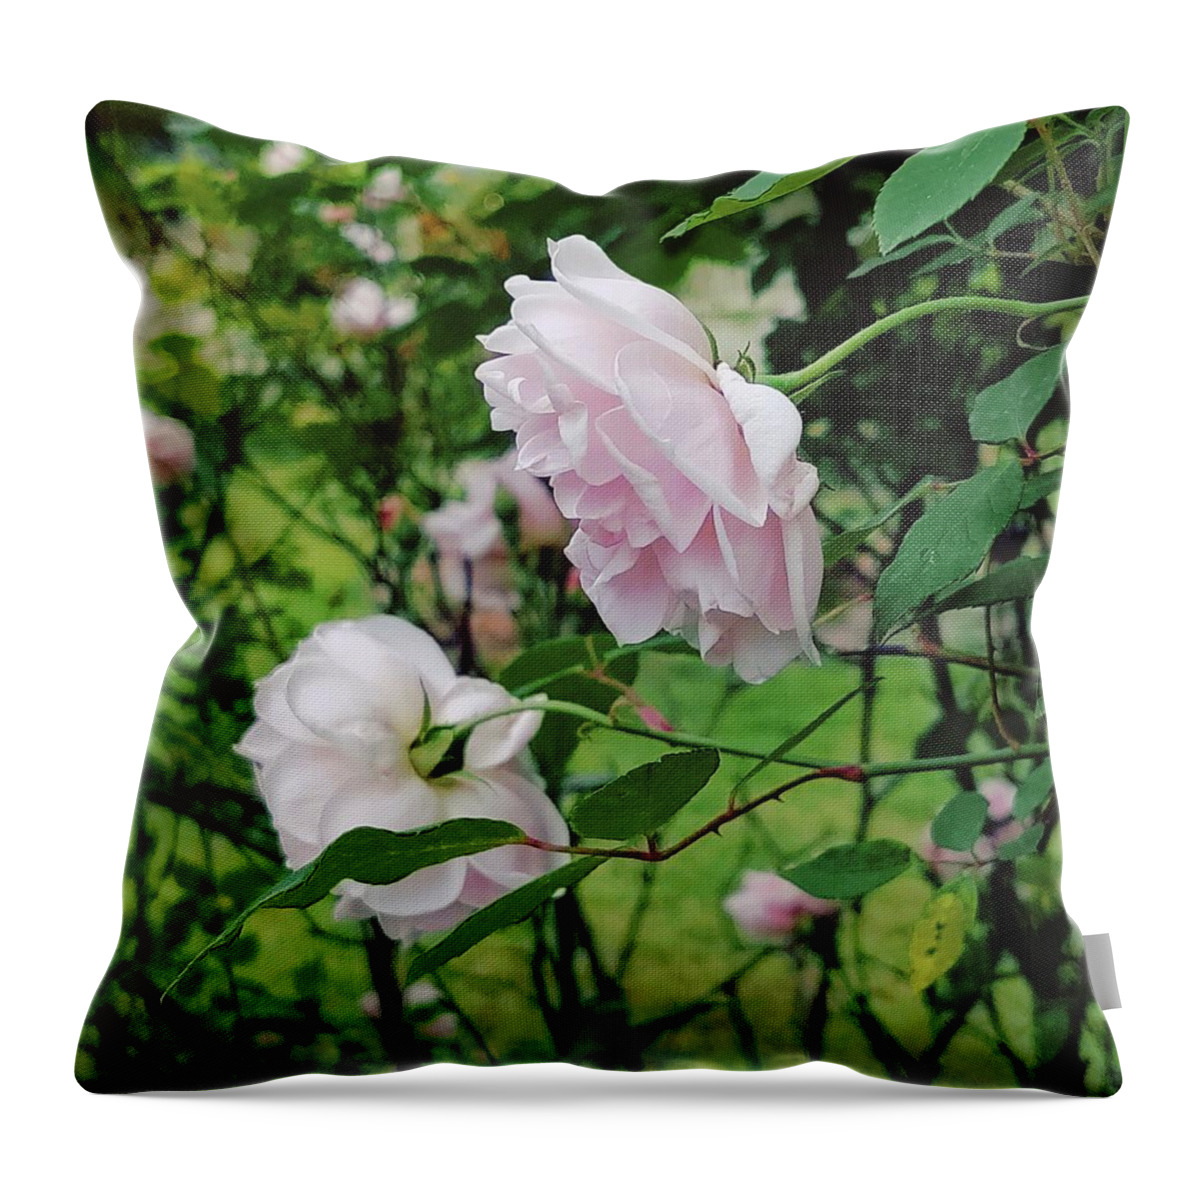 Old Fashioned Roses Throw Pillow featuring the digital art Charming Pale Pink Roses by Pamela Smale Williams